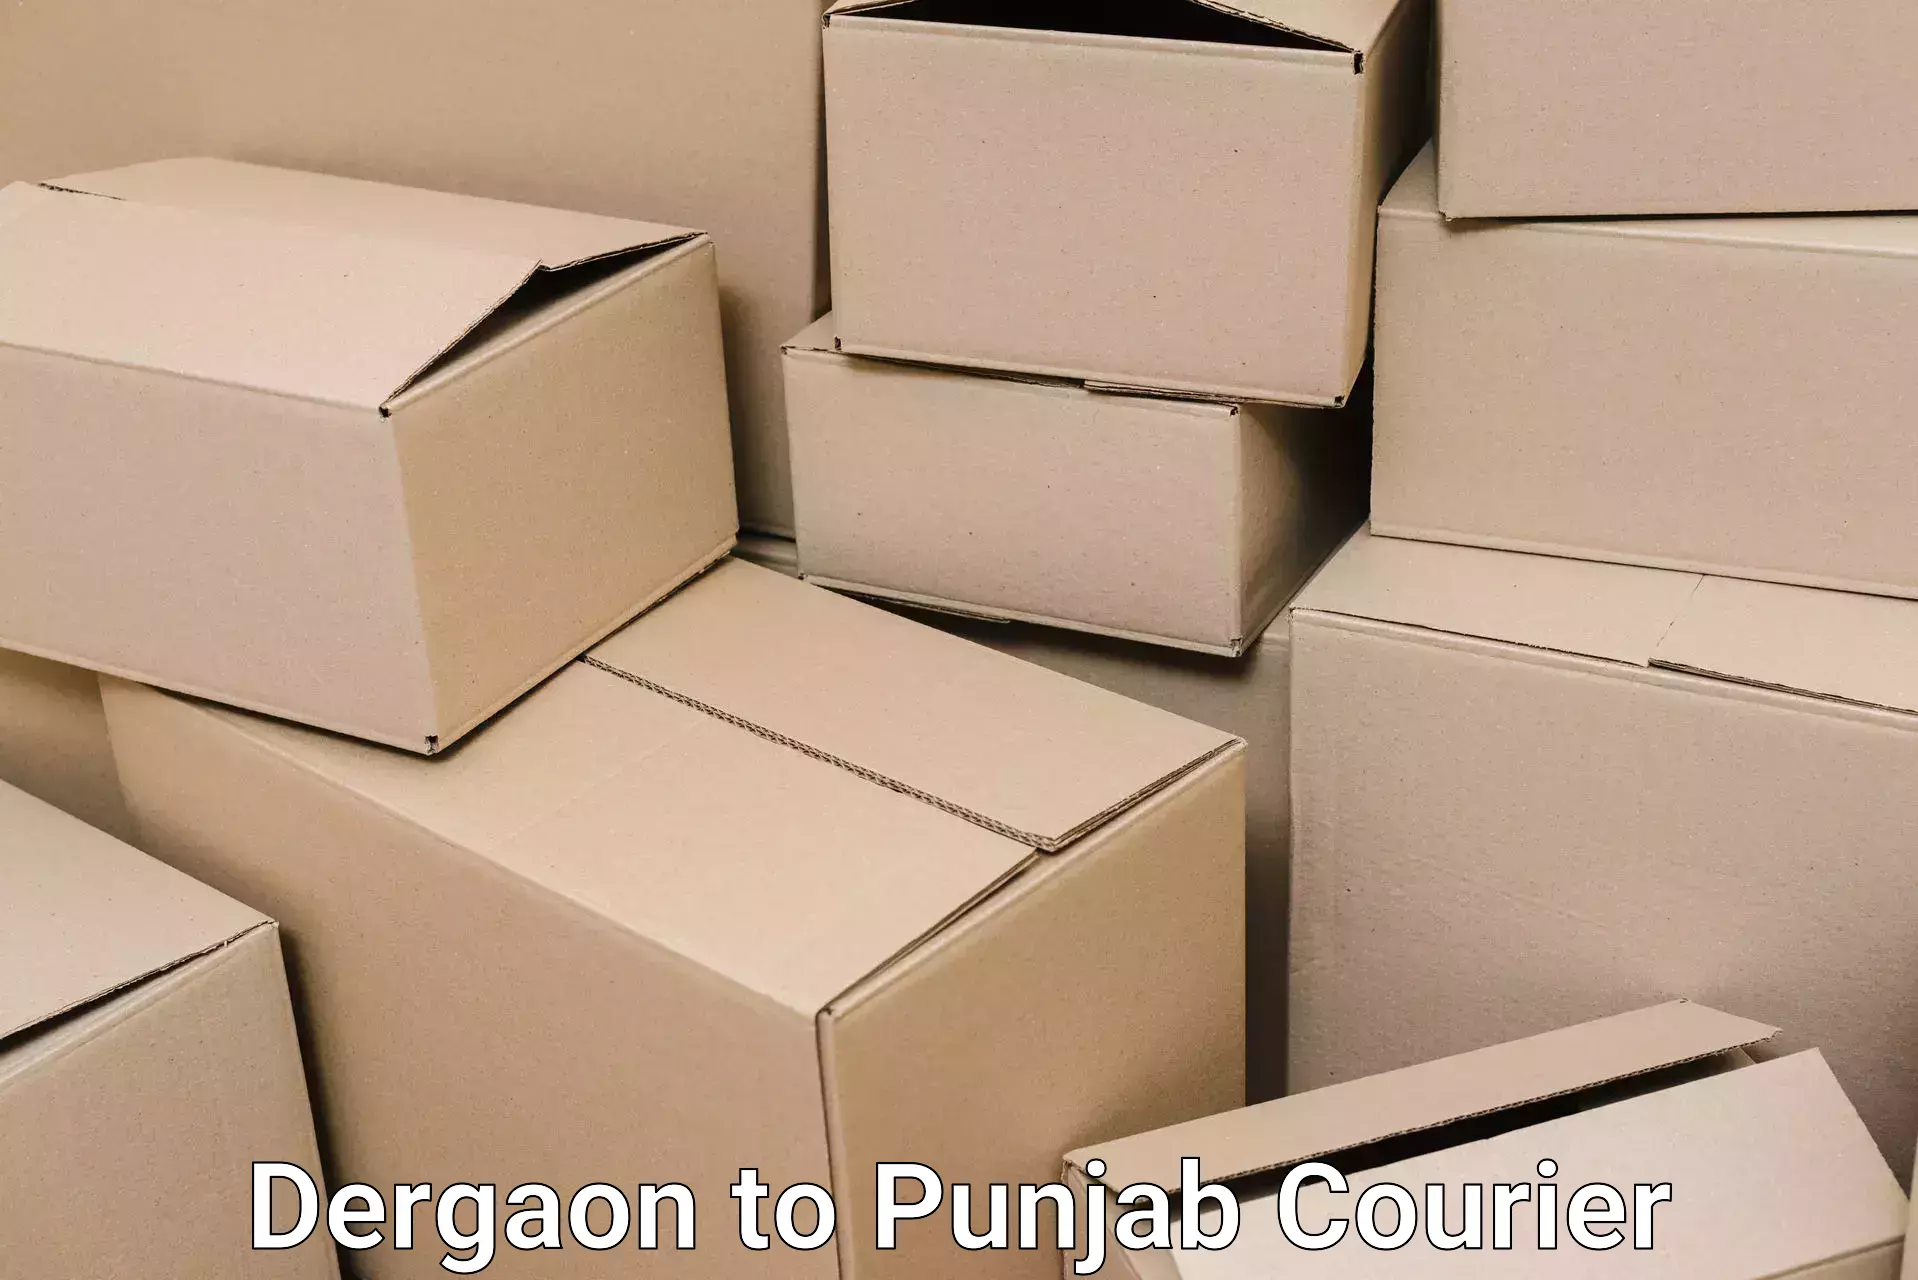 Full-service movers Dergaon to Mohali